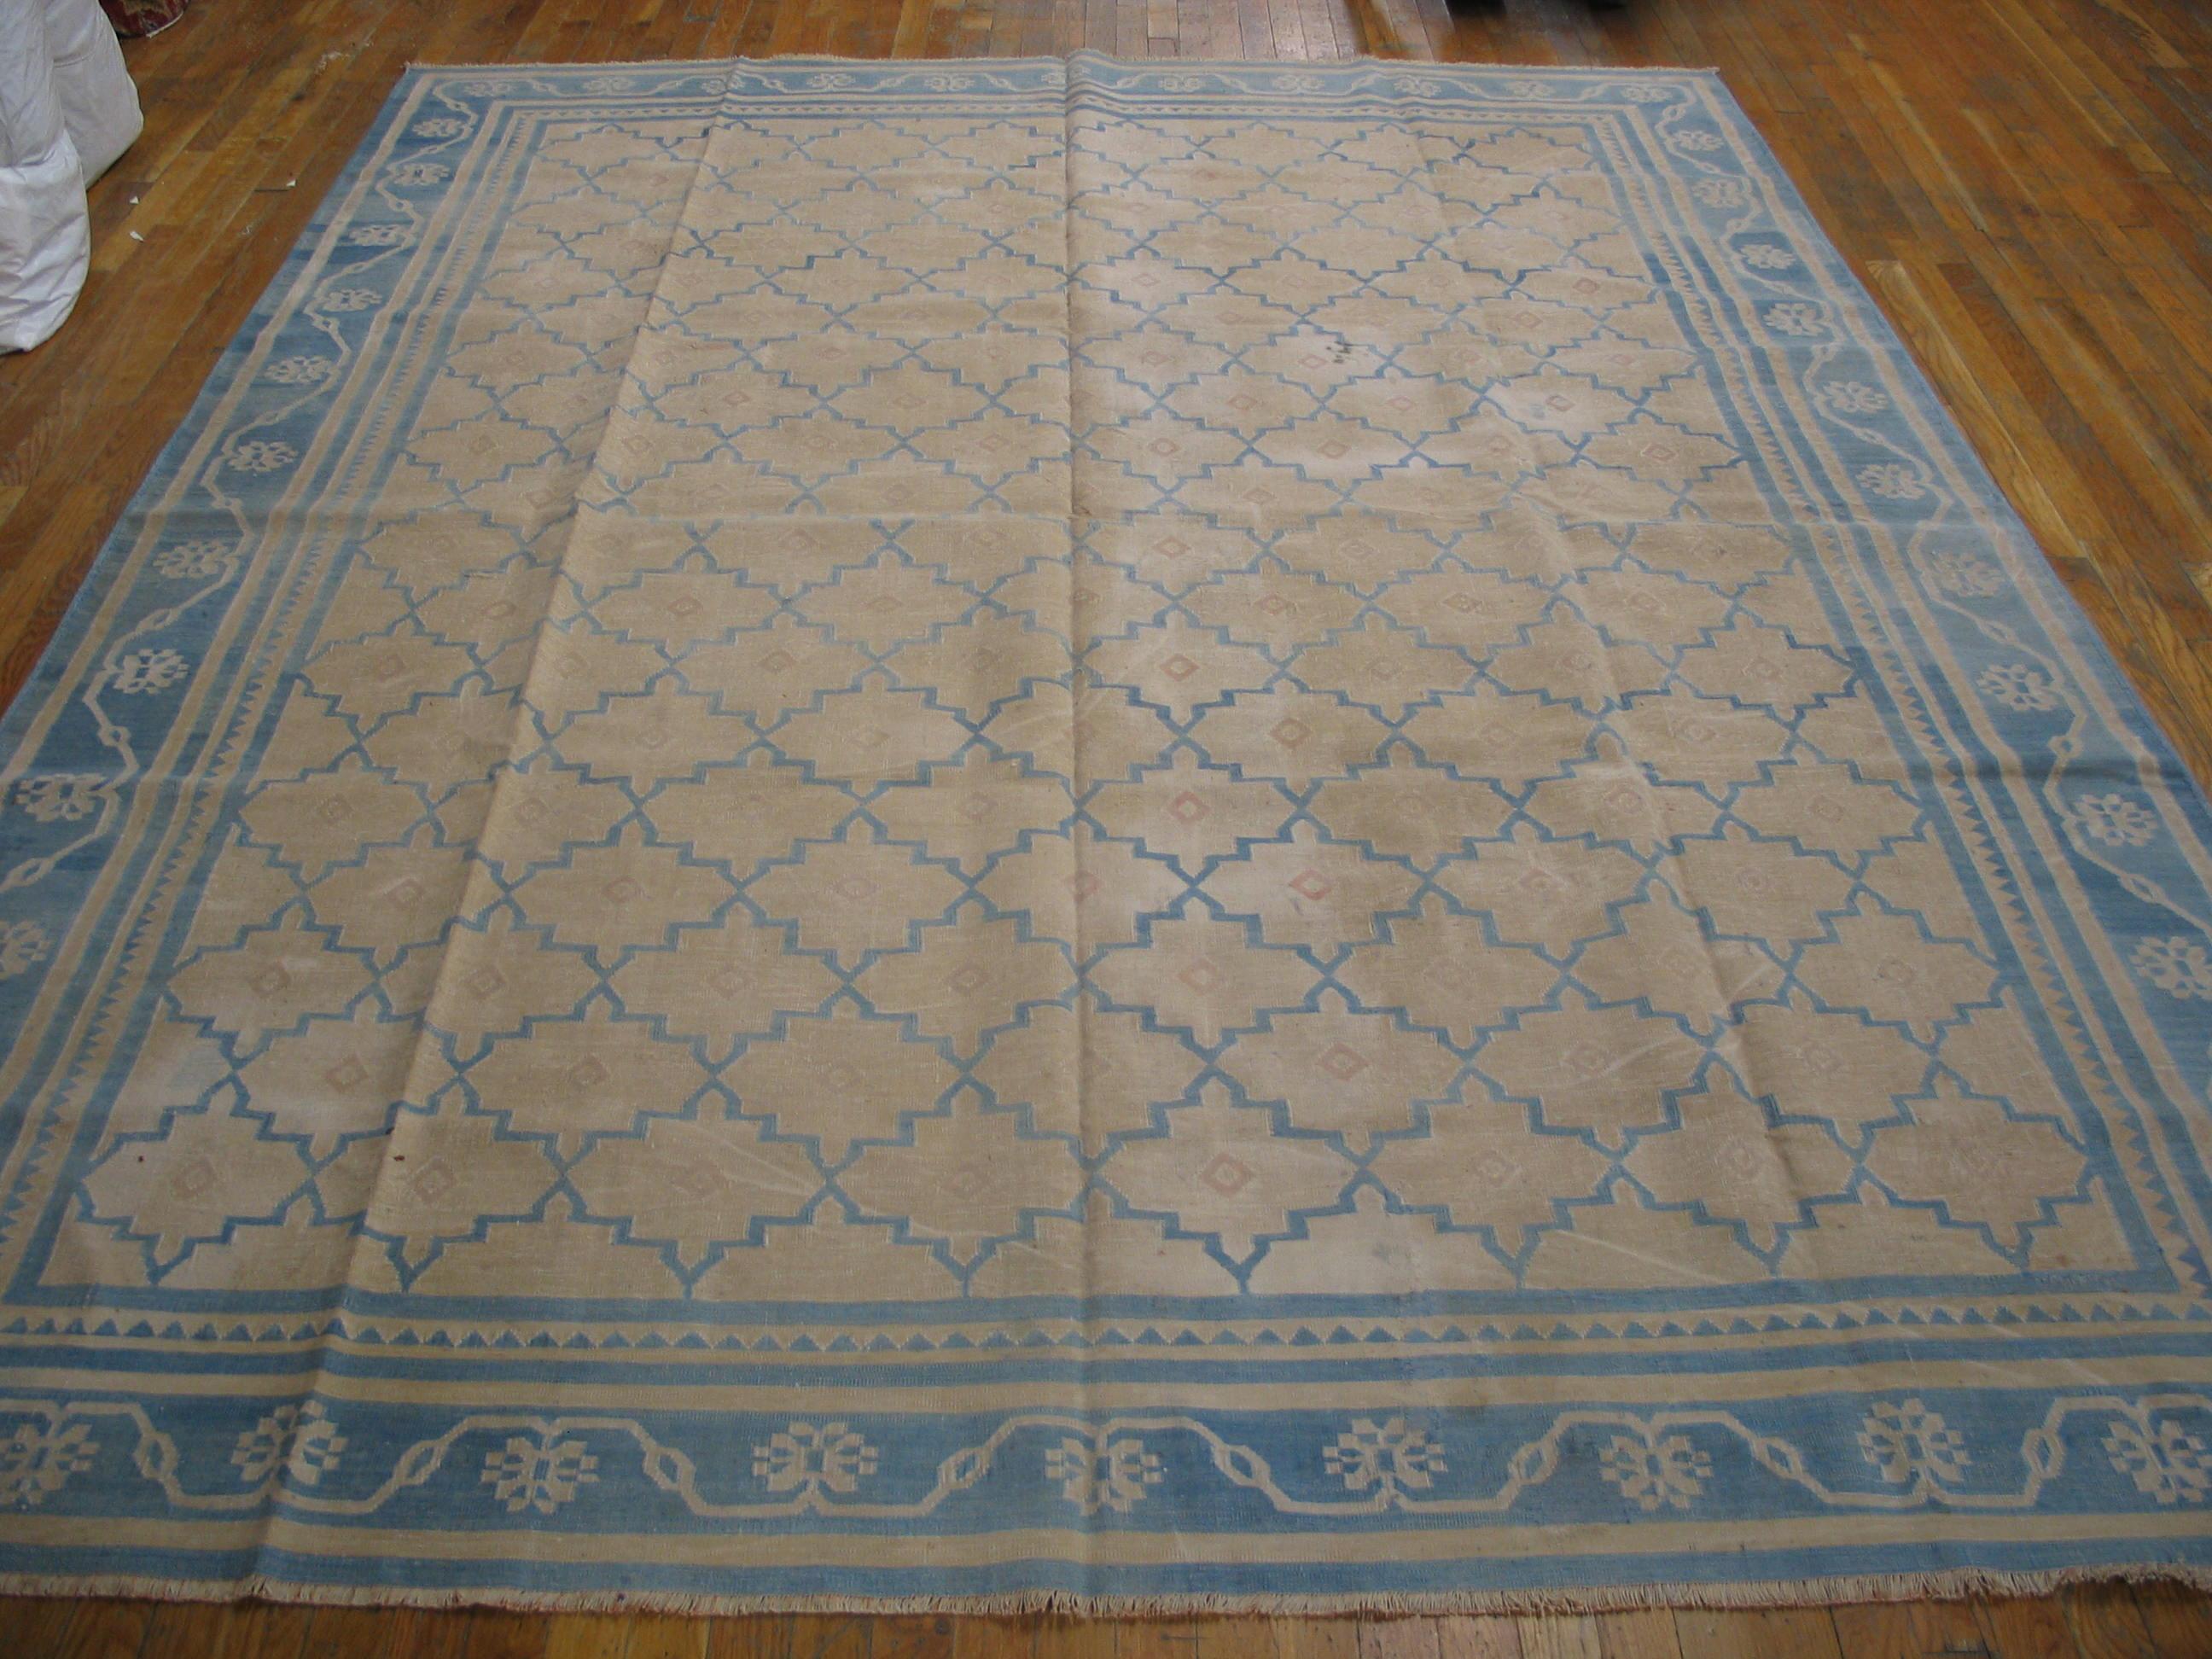 The sandy-straw field is organized precisely by a stepped blue lozenge lattice enclosing a small lozenge on each reserve. Denim blue palmette and meander main border and several inner stripes, plain and decorated. Antique all-cotton tapestry woven